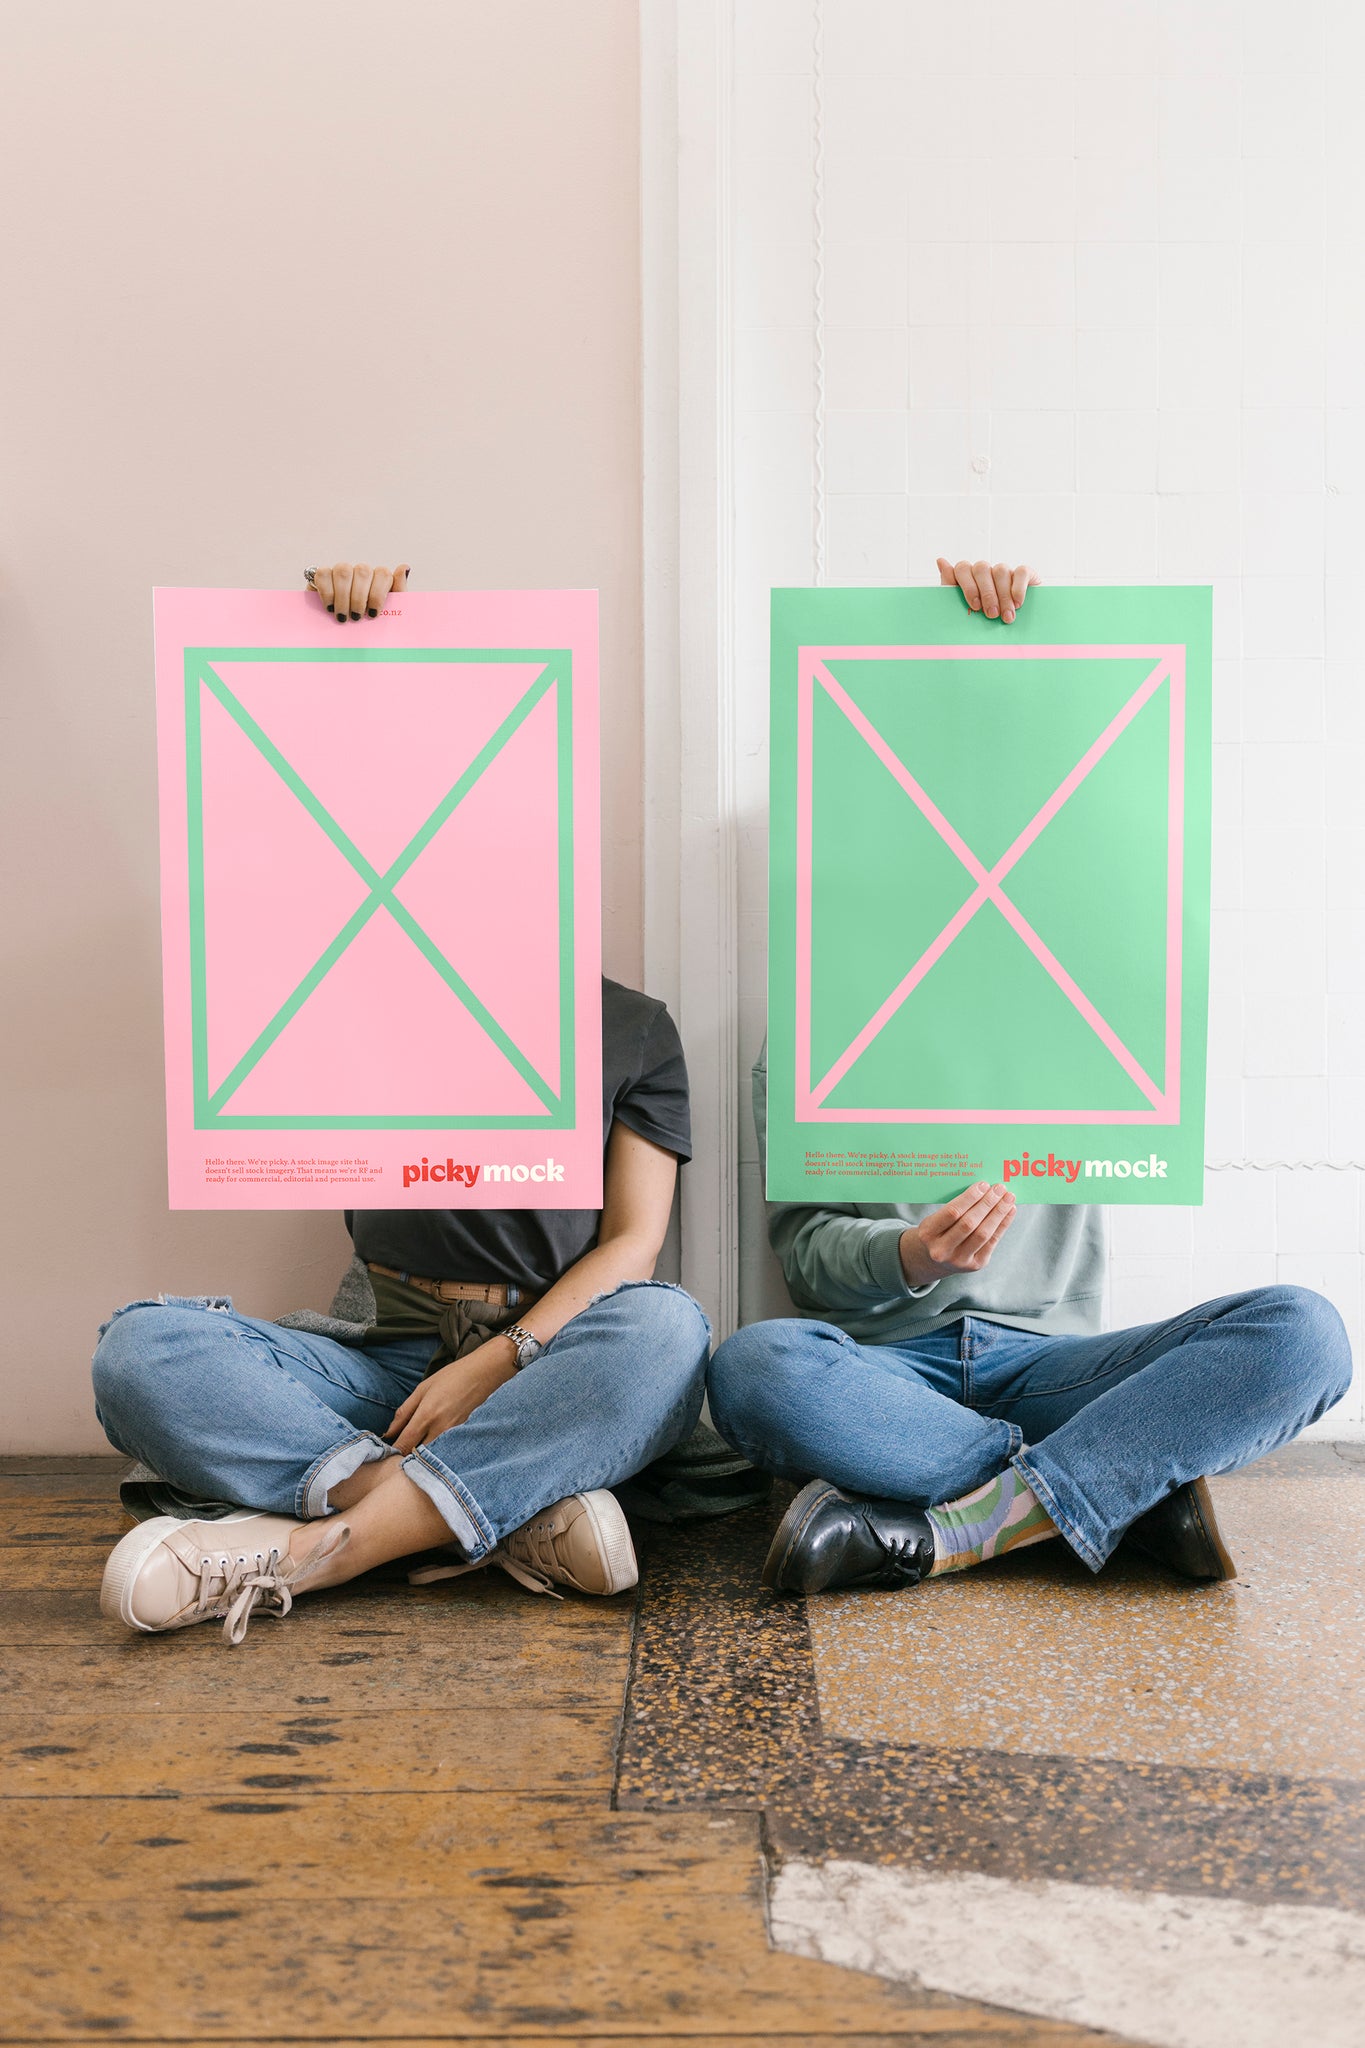 Portrait of two people sitting obscured by holding up mock advertisements in green and pink featuring small red picky logo.